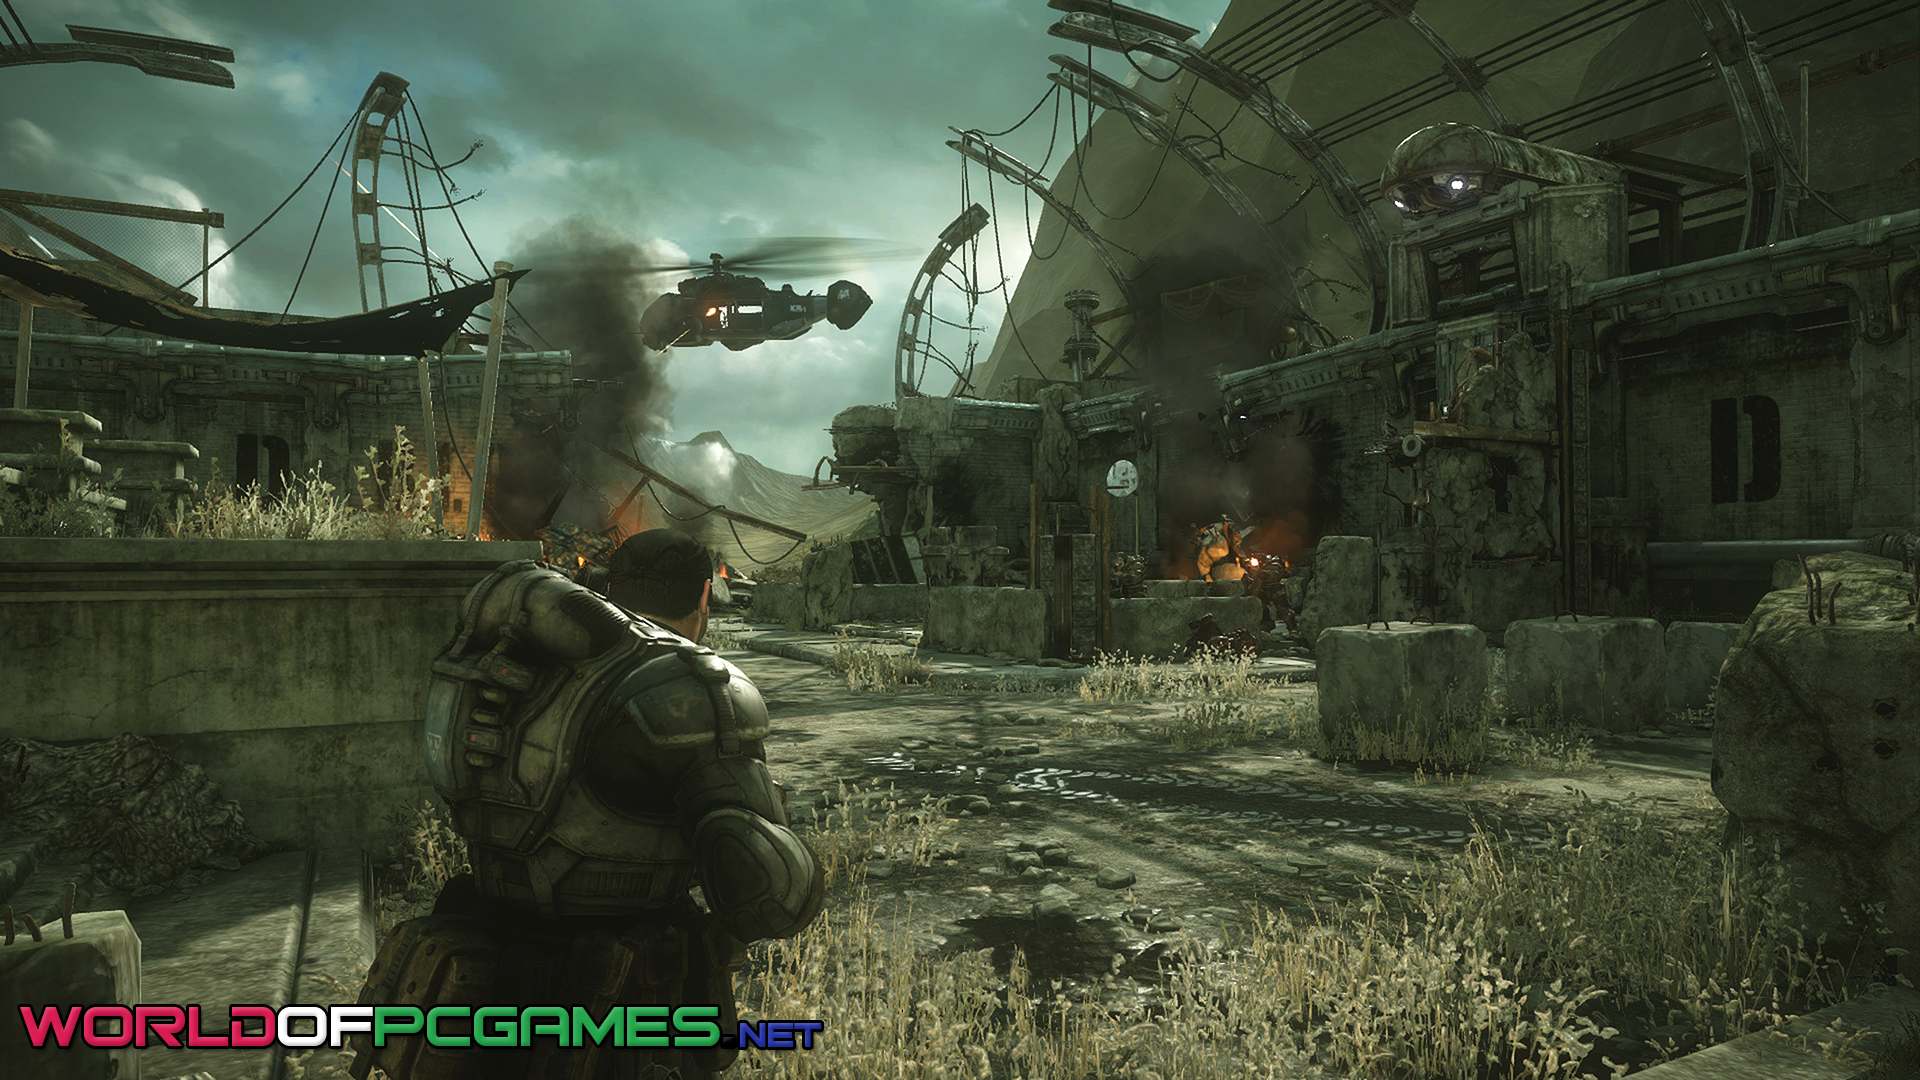 Gears Of War Free Download PC Game By worldof-pcgames.netm